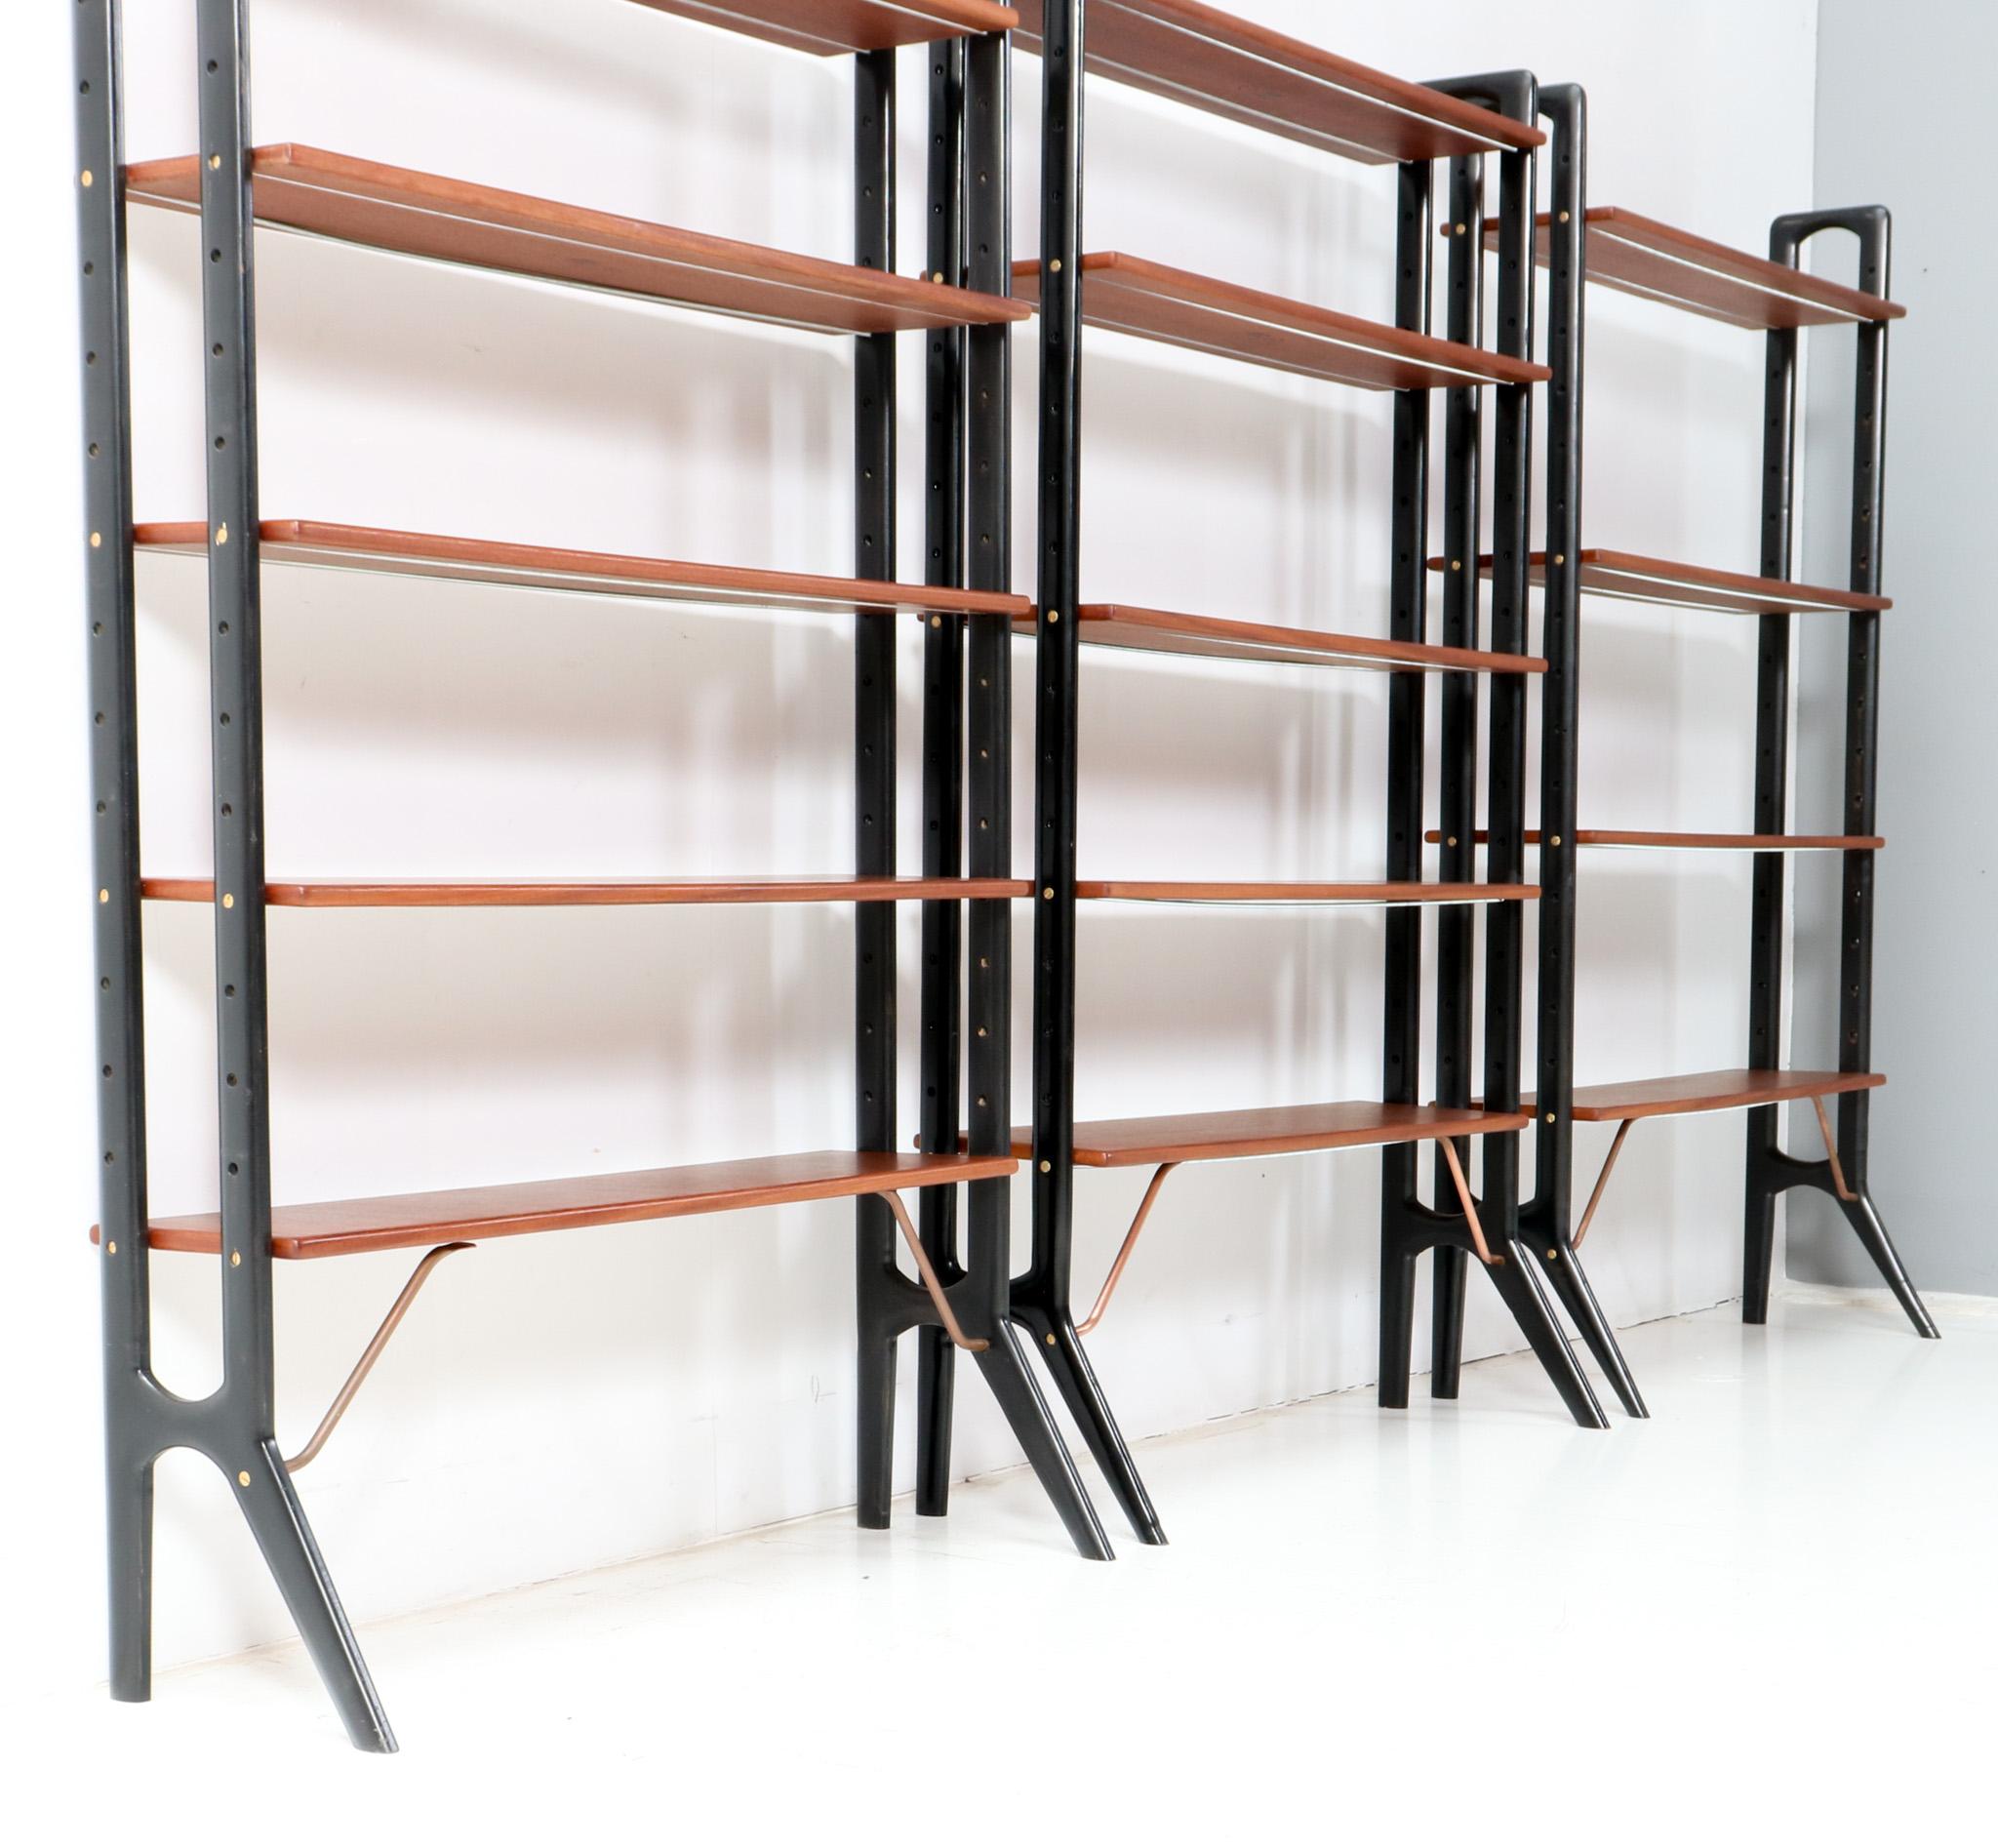 Three stunning Mid-Century Modern free standing shelving units.
Design by Kurt Østervig for KP Mobler Furniture Company.
Striking Danish design from the 1960s.
Two units have two black lacquered wooden uprights with five original teak veneered